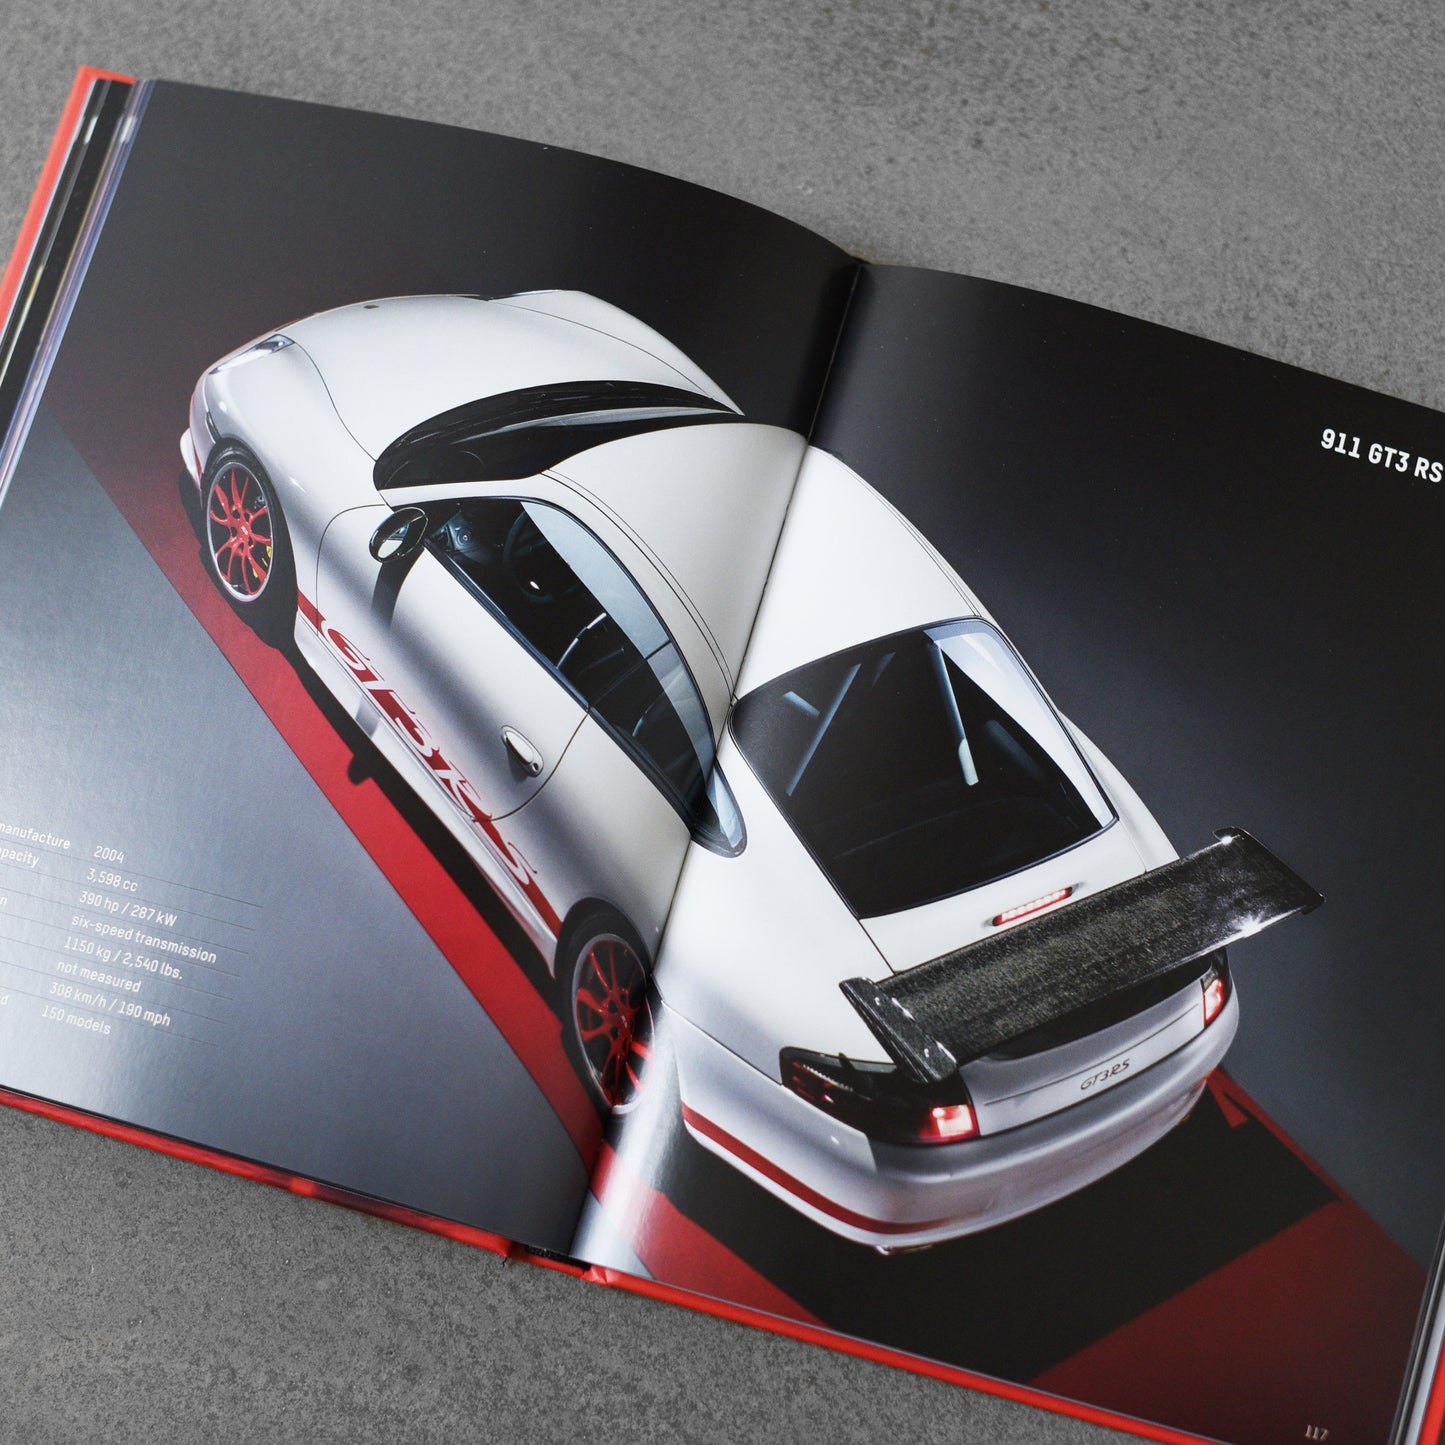 The Porsche 911 Book (New Revised Edition)